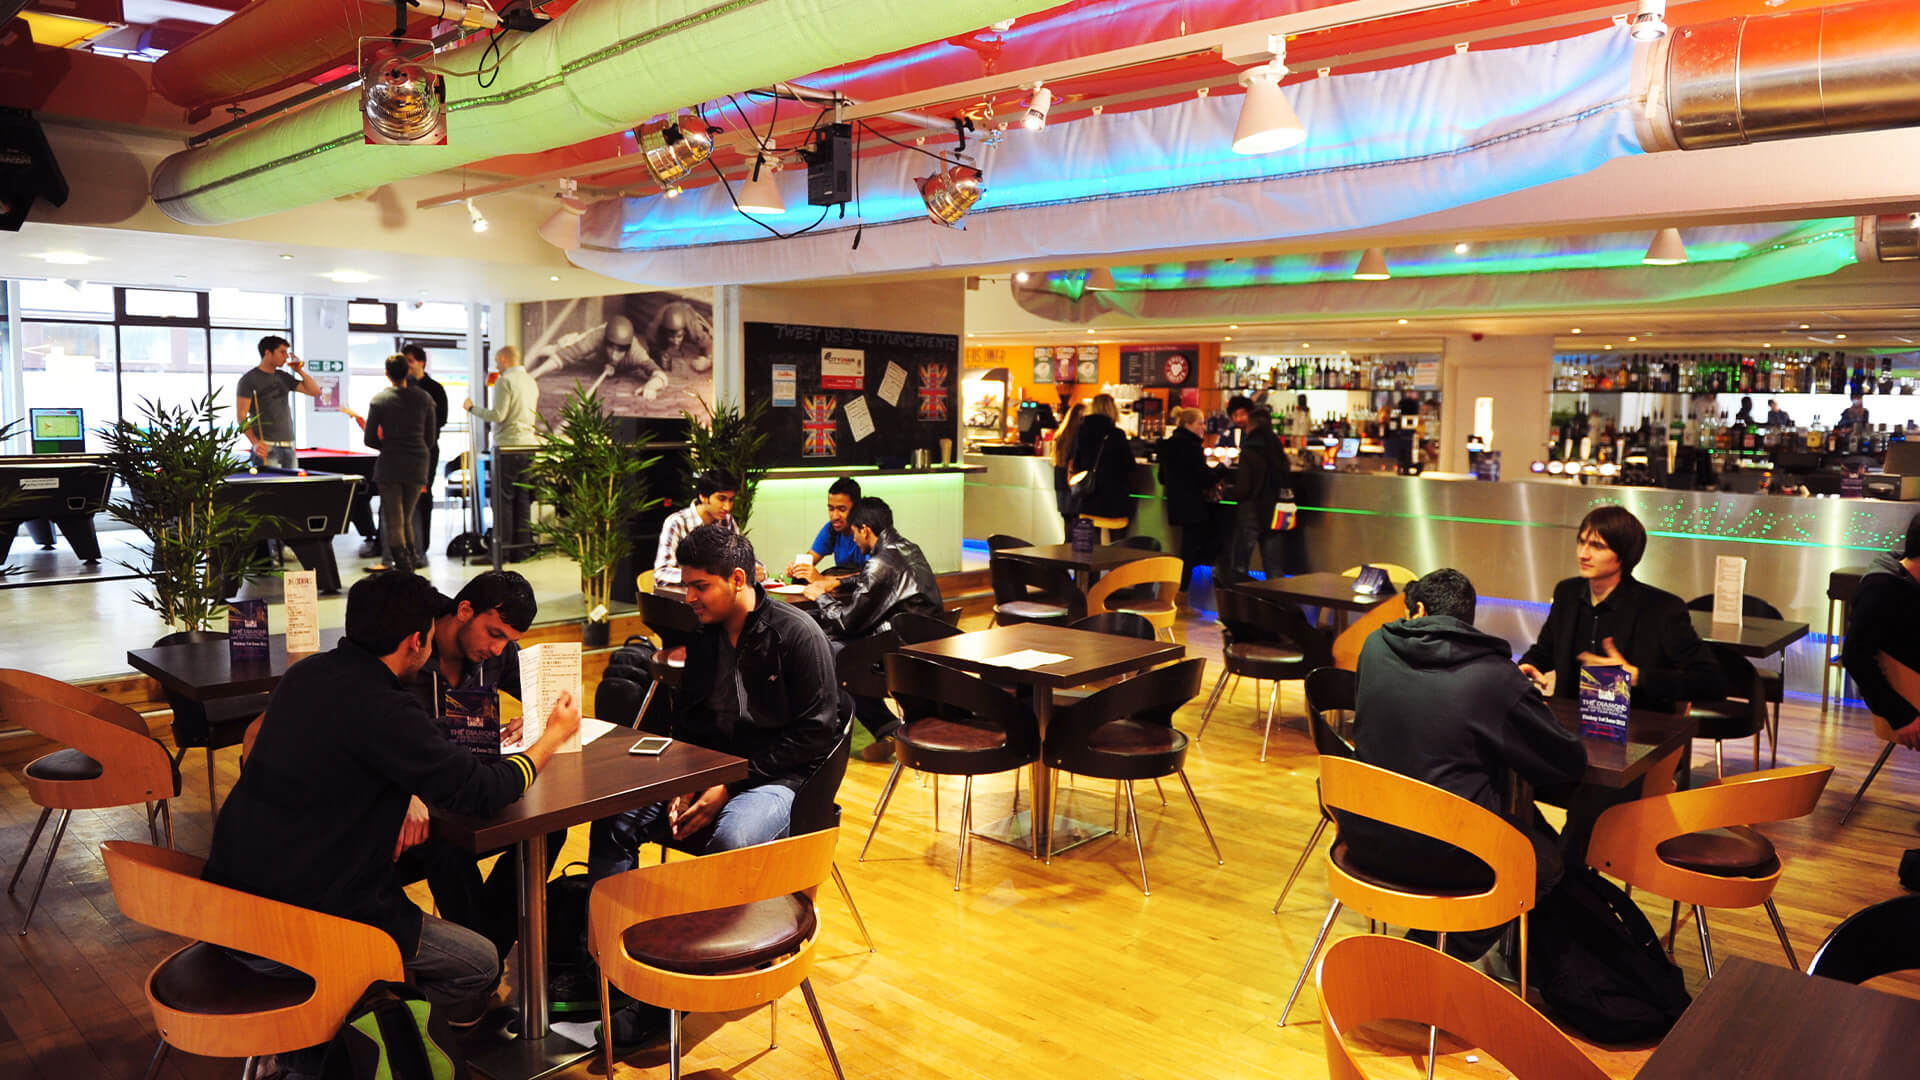 Students gathered in Tait Bar and Cafe at City, University of London